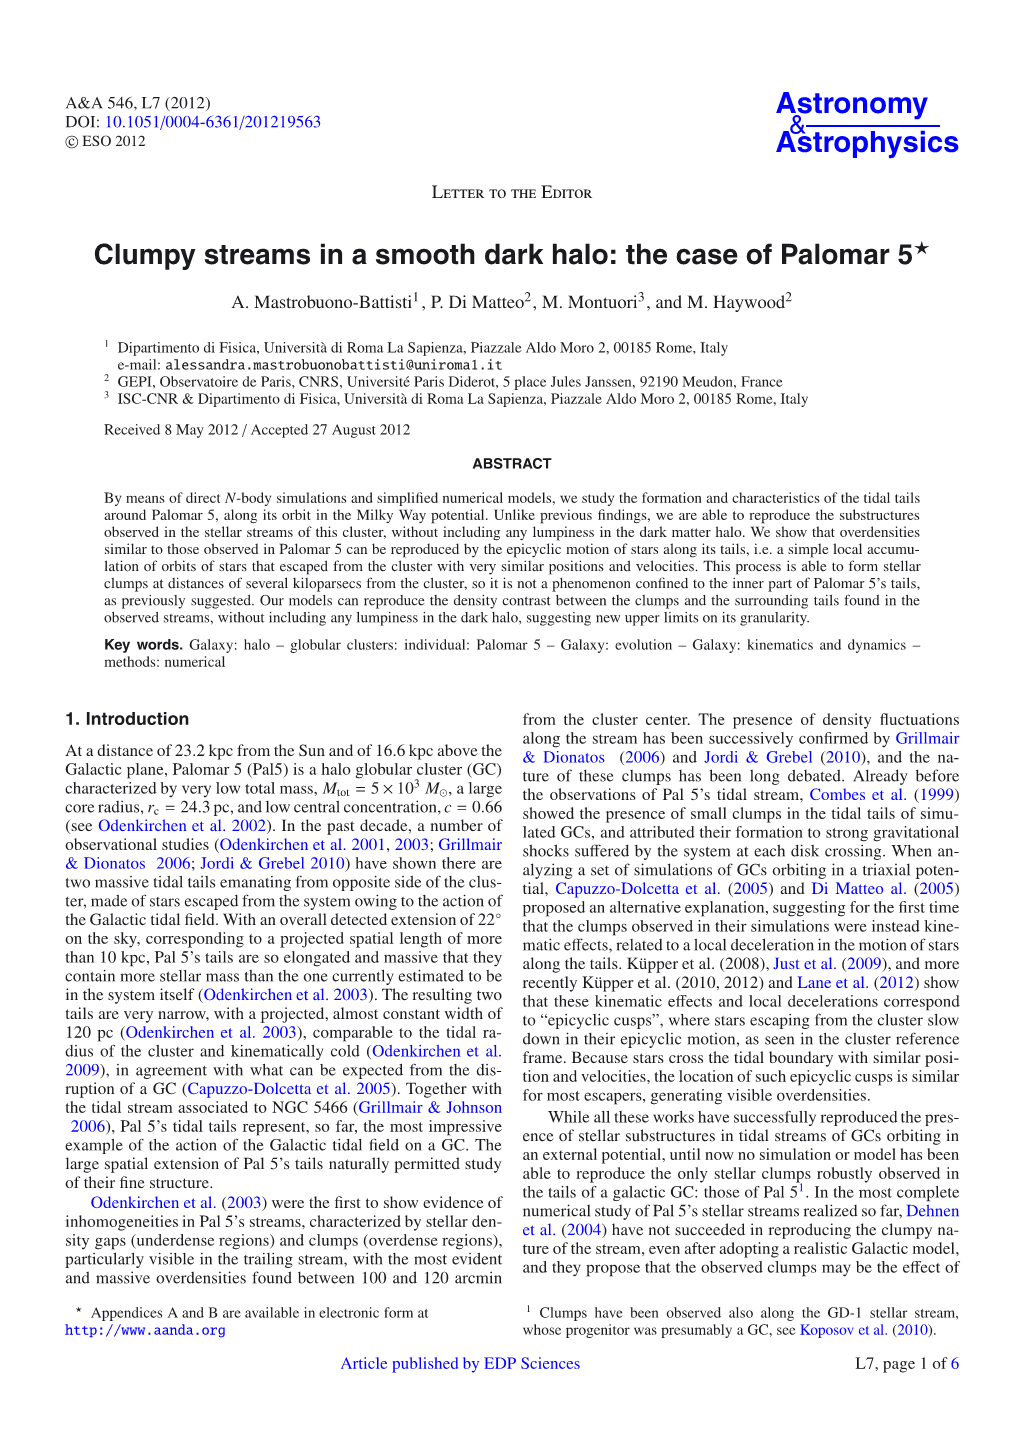 Clumpy Streams in a Smooth Dark Halo: the Case of Palomar 5⋆